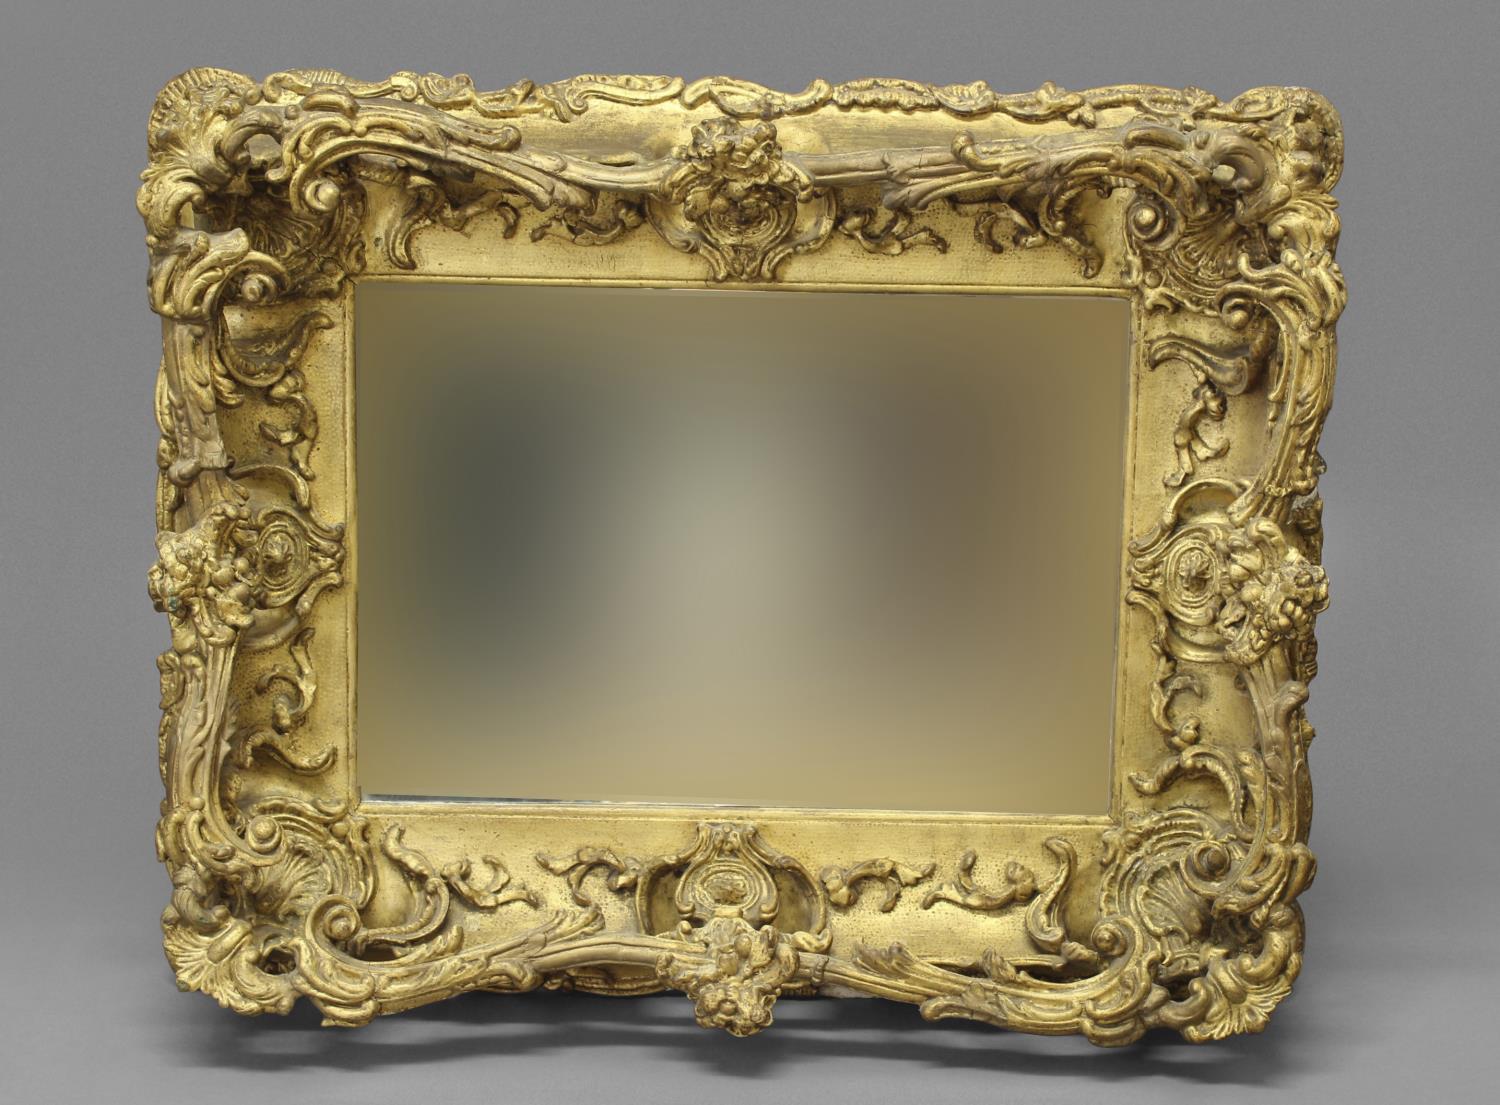 AN ELABORATE LATE 19TH CENTURY STYLE WALL MIRROR. An elaborate rectangular wall mirror with a - Image 2 of 2